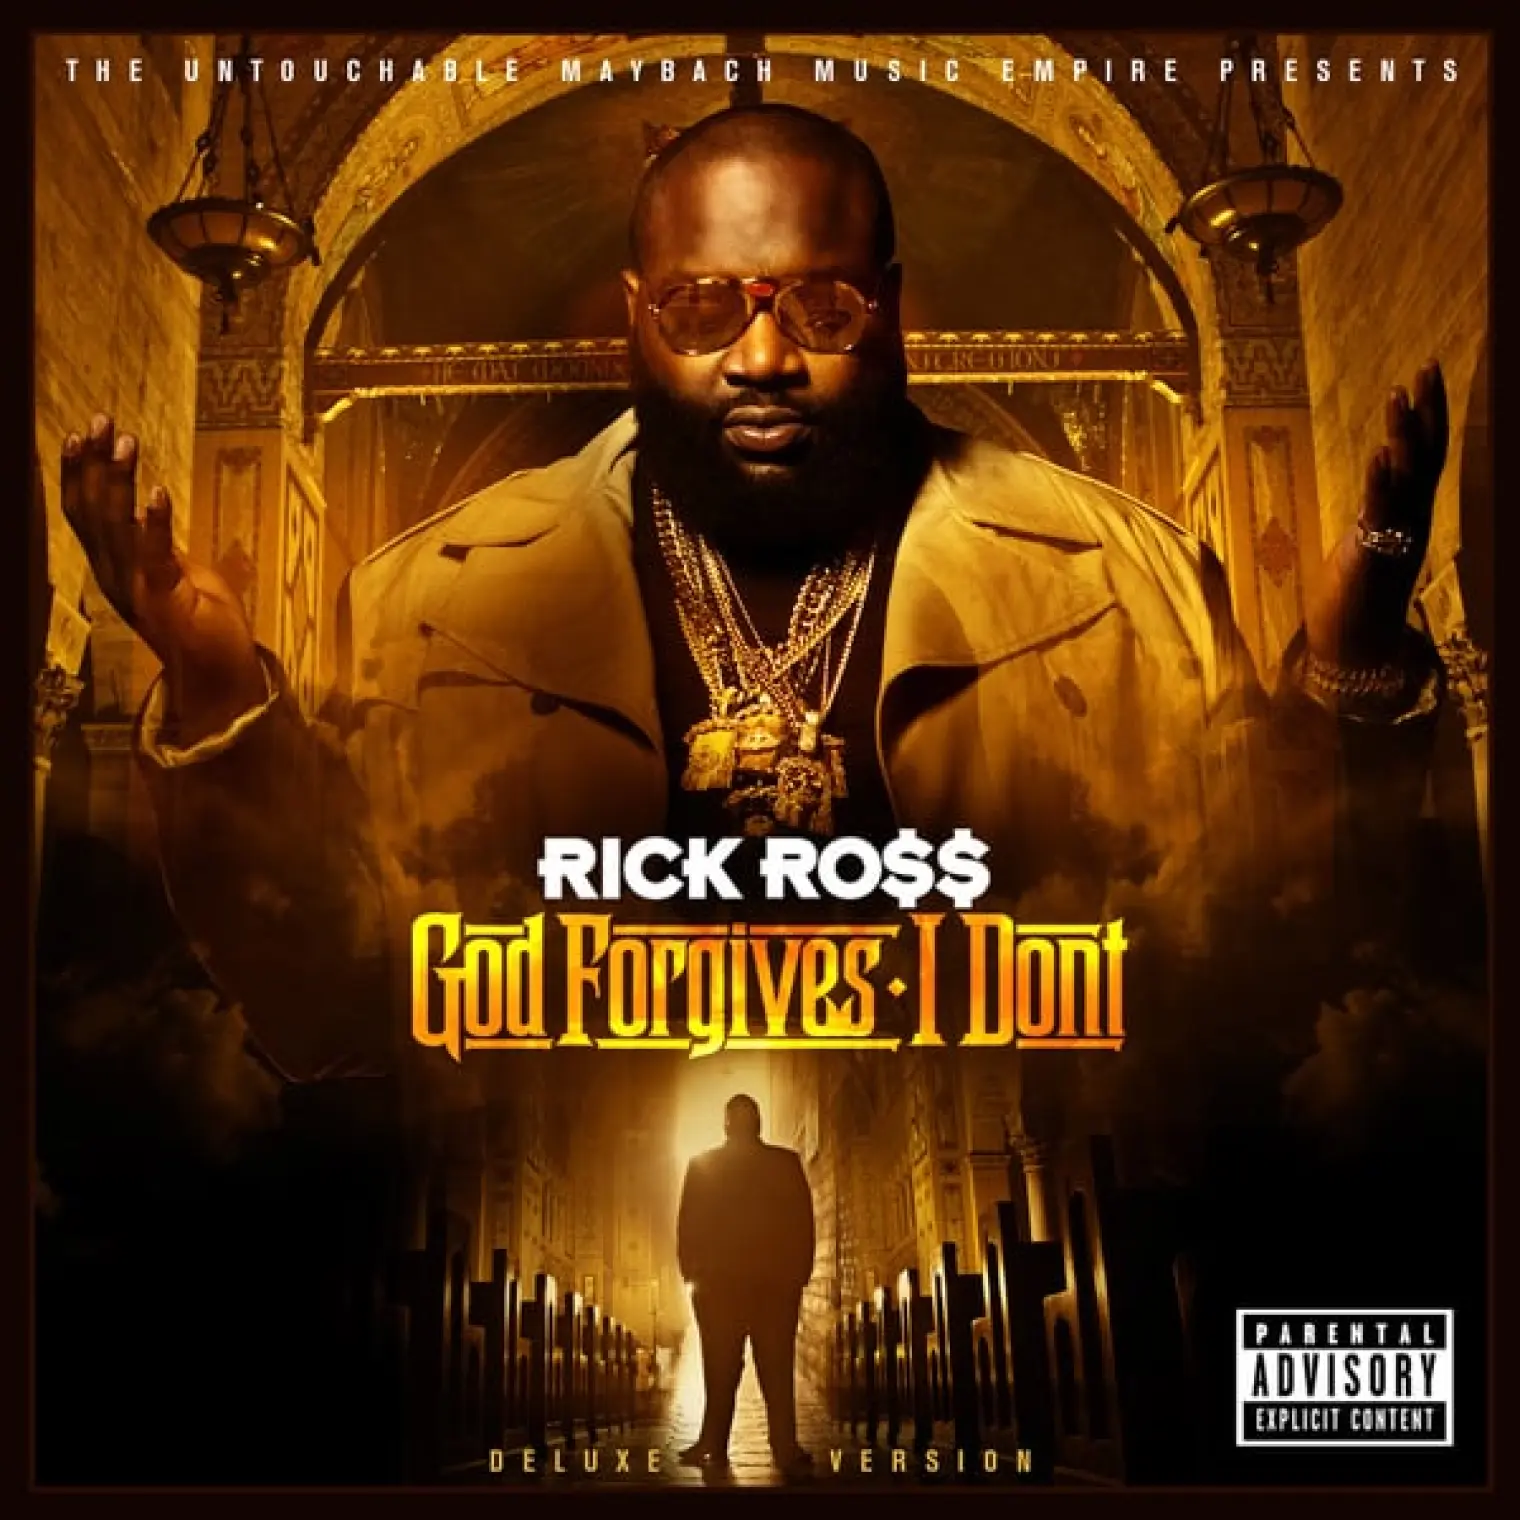 God Forgives, I Don't (Deluxe Edition) -  Rick Ross 